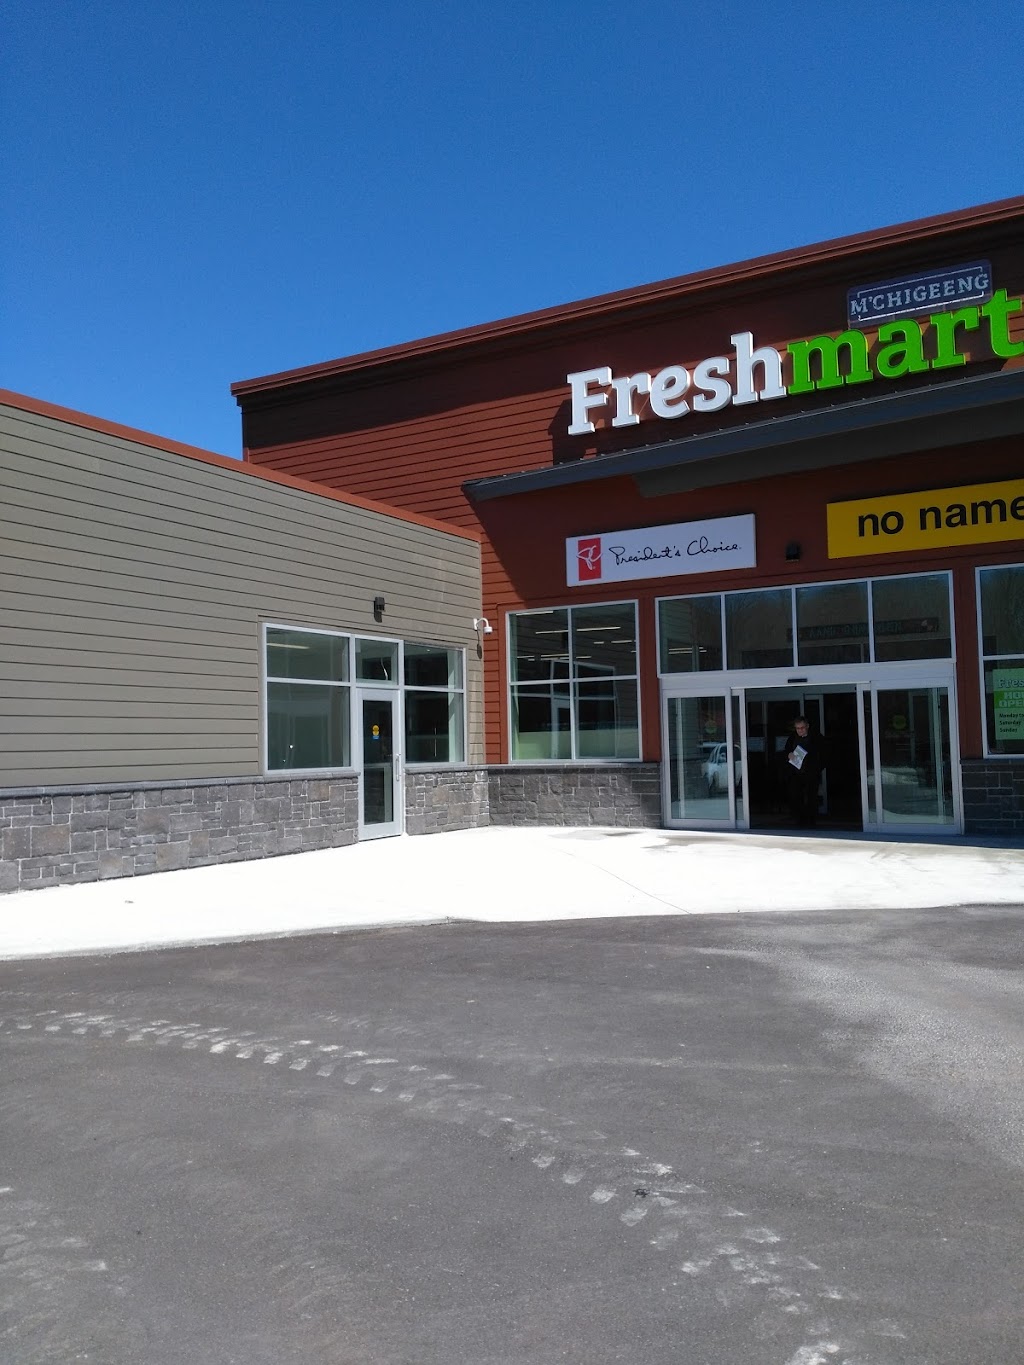 MChigeeng Freshmart | store | 404 ON-551, MChigeeng, ON P0P 1G0, Canada | 7053774345 OR +1 705-377-4345